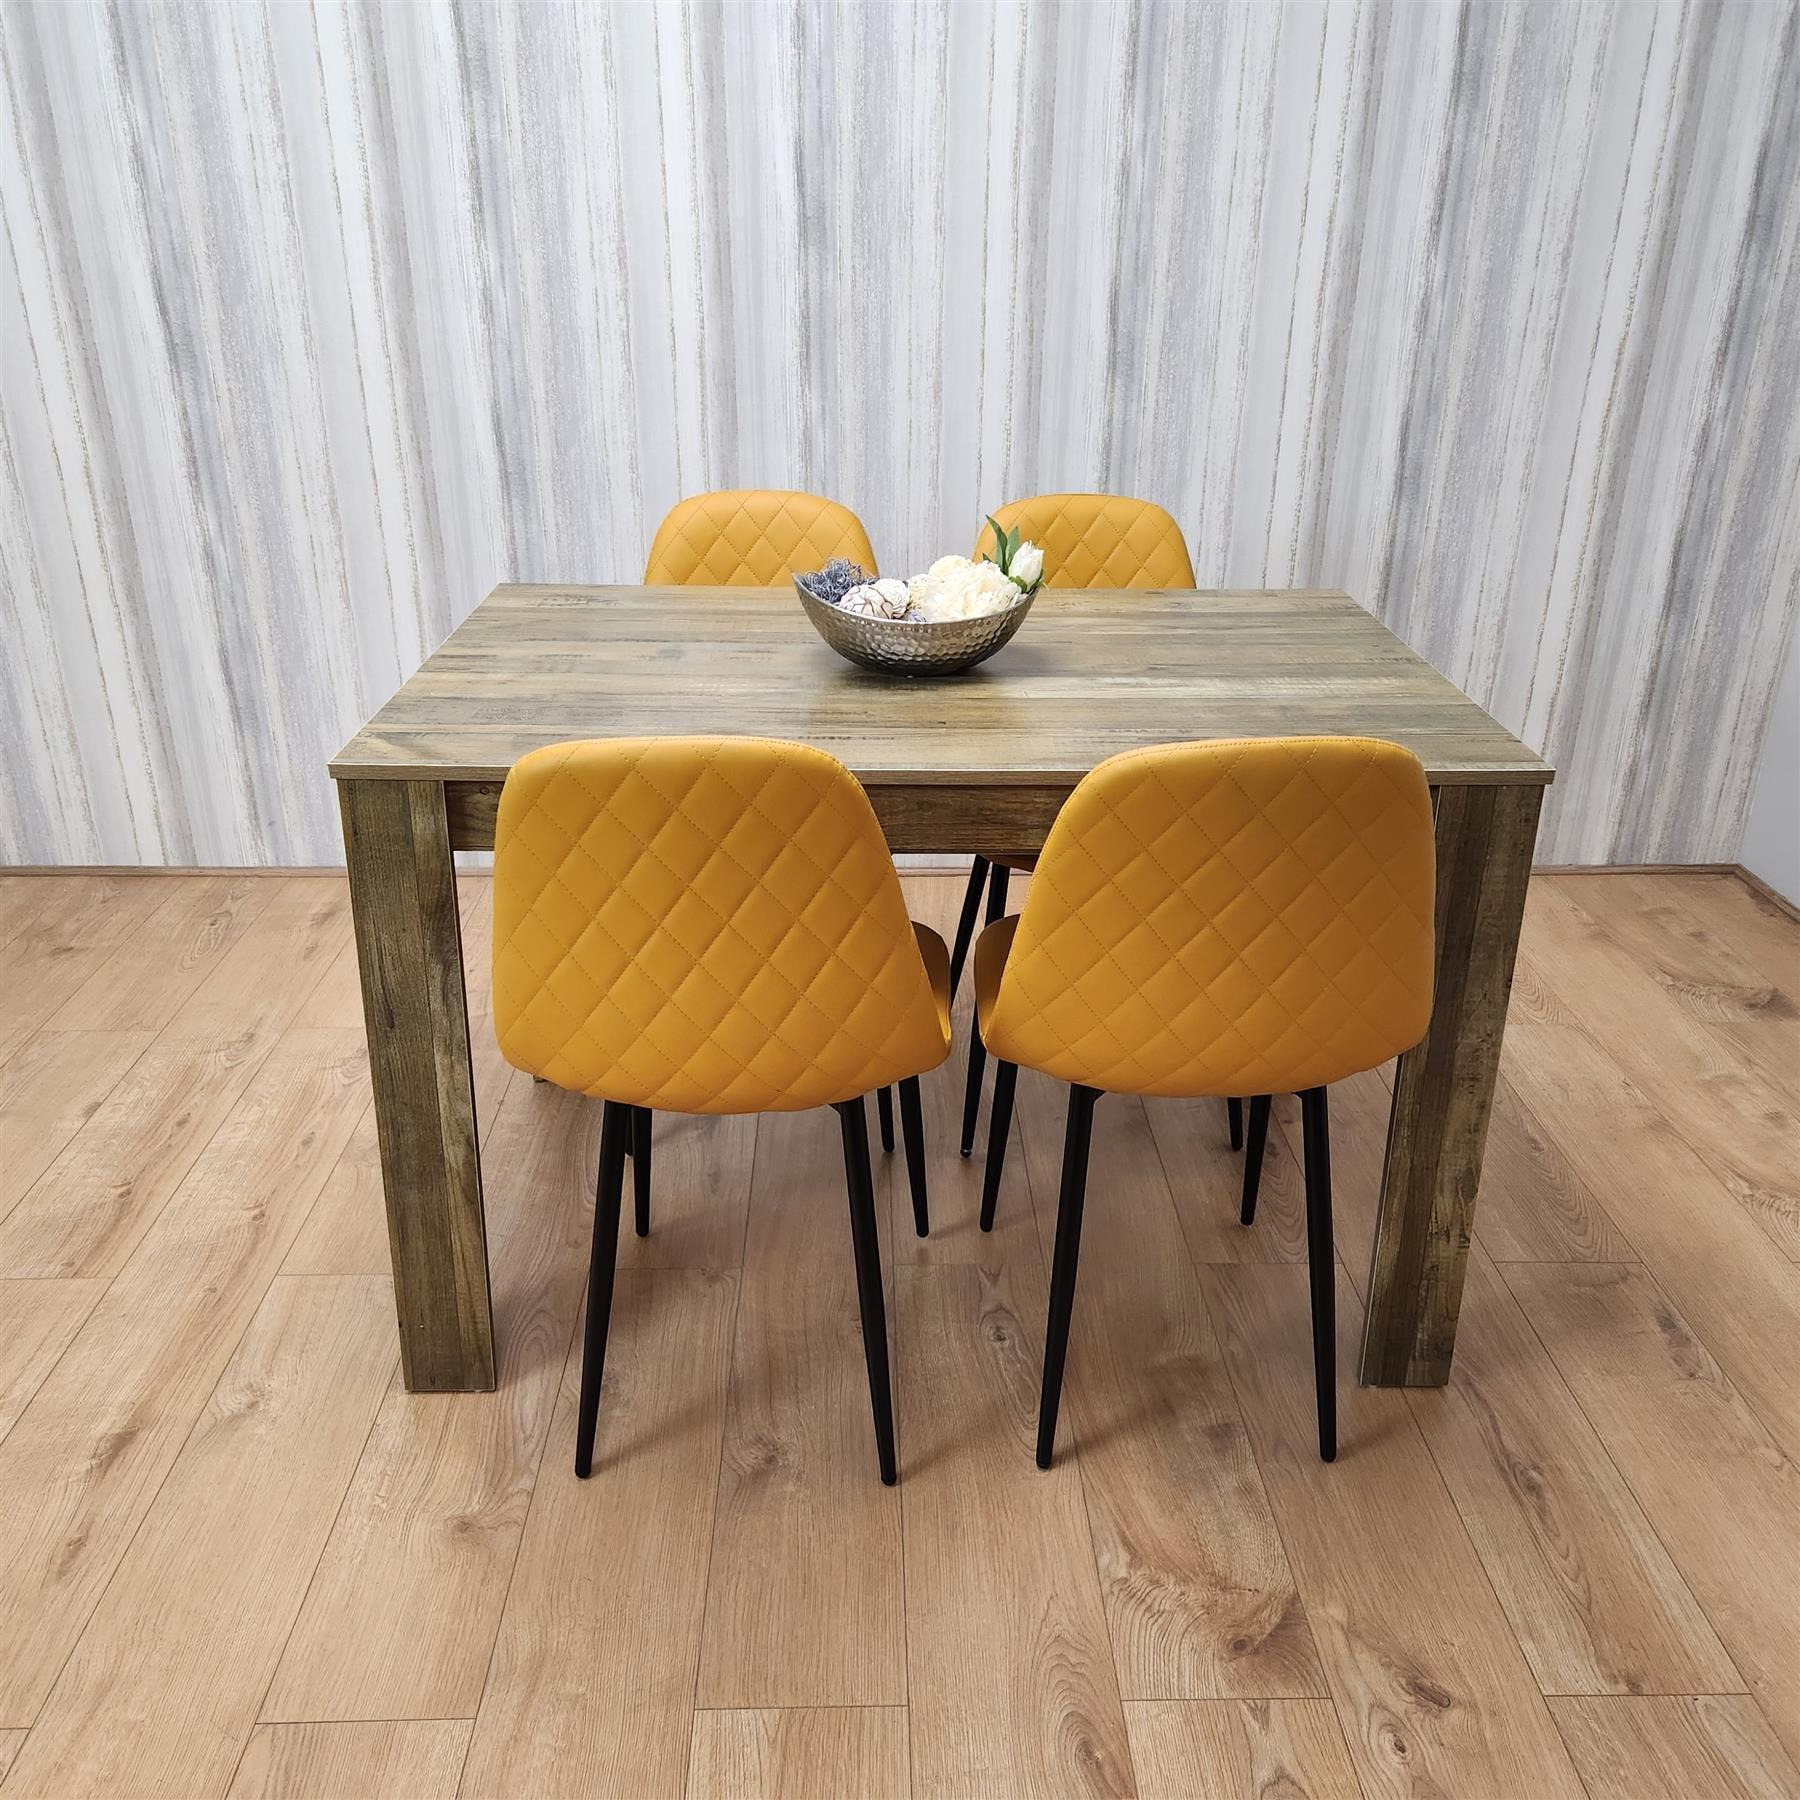 Dining Table and 4 Chairs Rustic Effect Table with 4 Mustard Gem Patterned Chairs - image 1